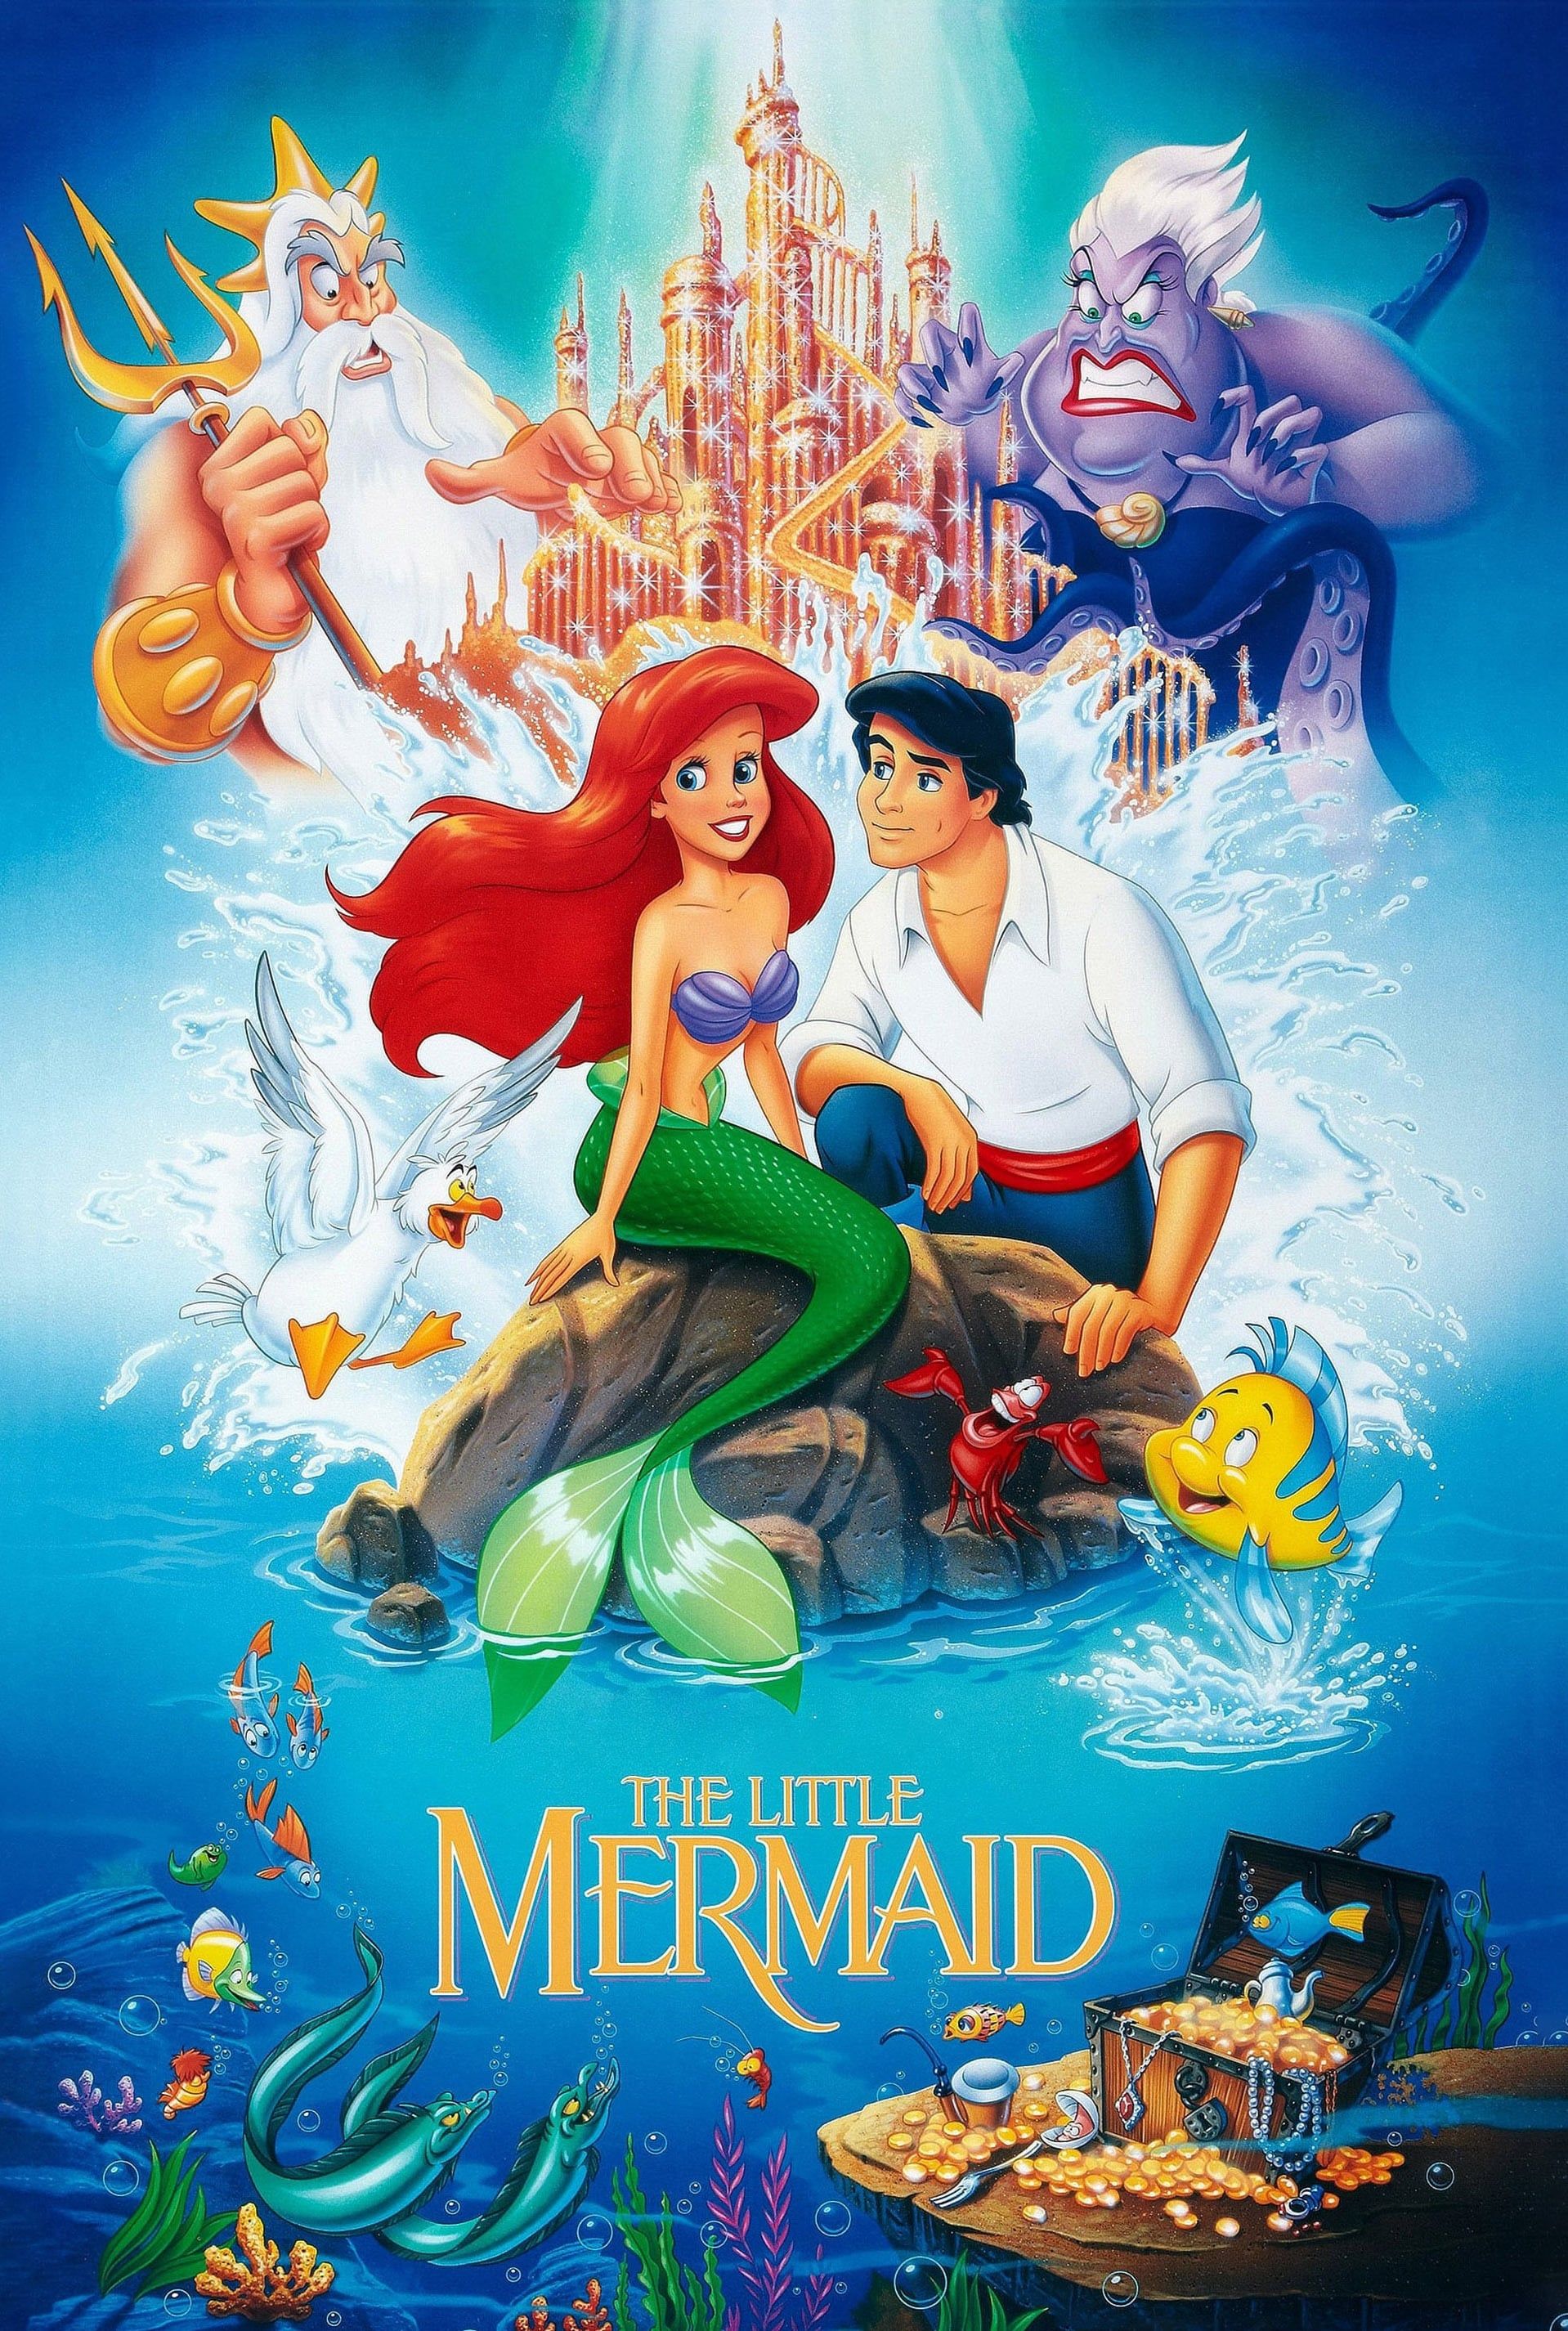 The Little Mermaid Live Action Hits the Cinema – The Cat's Eye View